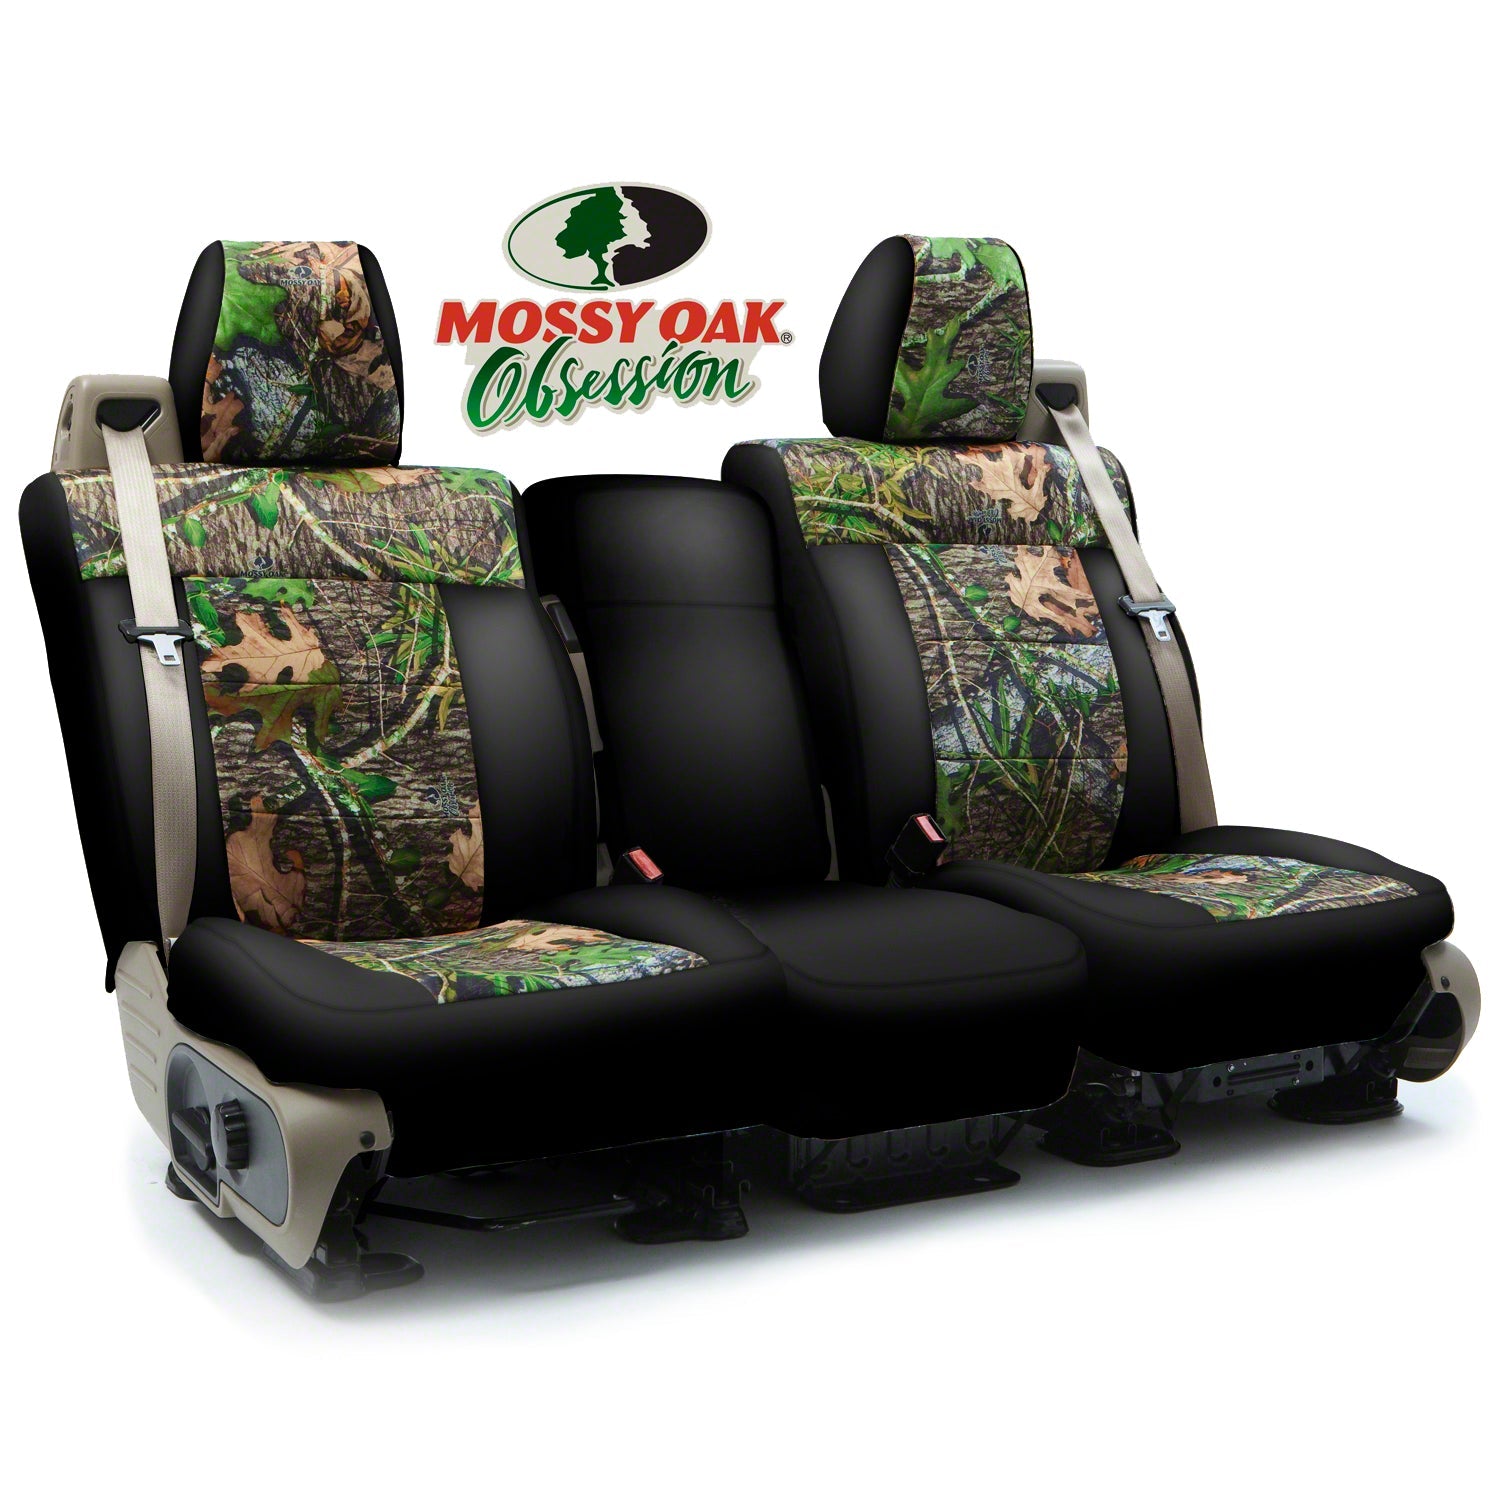  Mossy Oak Full Camo Steering Wheel Cover - Made with